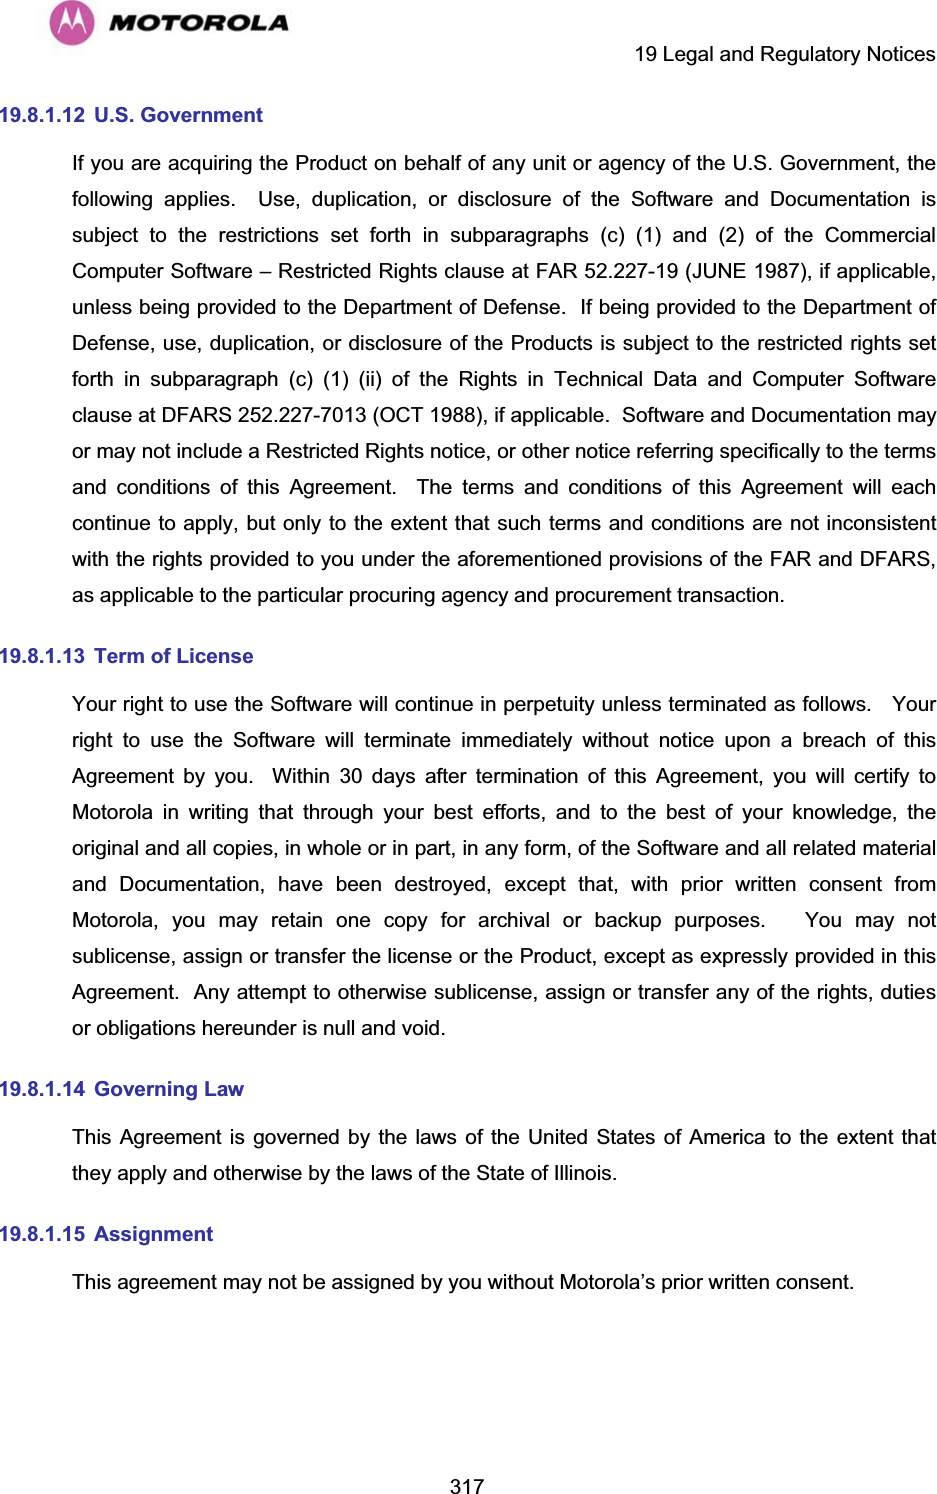     19 Legal and Regulatory Notices  31719.8.1.12  U.S. Government If you are acquiring the Product on behalf of any unit or agency of the U.S. Government, the following applies.  Use, duplication, or disclosure of the Software and Documentation is subject to the restrictions set forth in subparagraphs (c) (1) and (2) of the Commercial Computer Software – Restricted Rights clause at FAR 52.227-19 (JUNE 1987), if applicable, unless being provided to the Department of Defense.  If being provided to the Department of Defense, use, duplication, or disclosure of the Products is subject to the restricted rights set forth in subparagraph (c) (1) (ii) of the Rights in Technical Data and Computer Software clause at DFARS 252.227-7013 (OCT 1988), if applicable.  Software and Documentation may or may not include a Restricted Rights notice, or other notice referring specifically to the terms and conditions of this Agreement.  The terms and conditions of this Agreement will each continue to apply, but only to the extent that such terms and conditions are not inconsistent with the rights provided to you under the aforementioned provisions of the FAR and DFARS, as applicable to the particular procuring agency and procurement transaction. 19.8.1.13  Term of License Your right to use the Software will continue in perpetuity unless terminated as follows.   Your right to use the Software will terminate immediately without notice upon a breach of this Agreement by you.  Within 30 days after termination of this Agreement, you will certify to Motorola in writing that through your best efforts, and to the best of your knowledge, the original and all copies, in whole or in part, in any form, of the Software and all related material and Documentation, have been destroyed, except that, with prior written consent from Motorola, you may retain one copy for archival or backup purposes.   You may not sublicense, assign or transfer the license or the Product, except as expressly provided in this Agreement.  Any attempt to otherwise sublicense, assign or transfer any of the rights, duties or obligations hereunder is null and void. 19.8.1.14   Governing  Law This Agreement is governed by the laws of the United States of America to the extent that they apply and otherwise by the laws of the State of Illinois. 19.8.1.15   Assignment This agreement may not be assigned by you without Motorola’s prior written consent. 